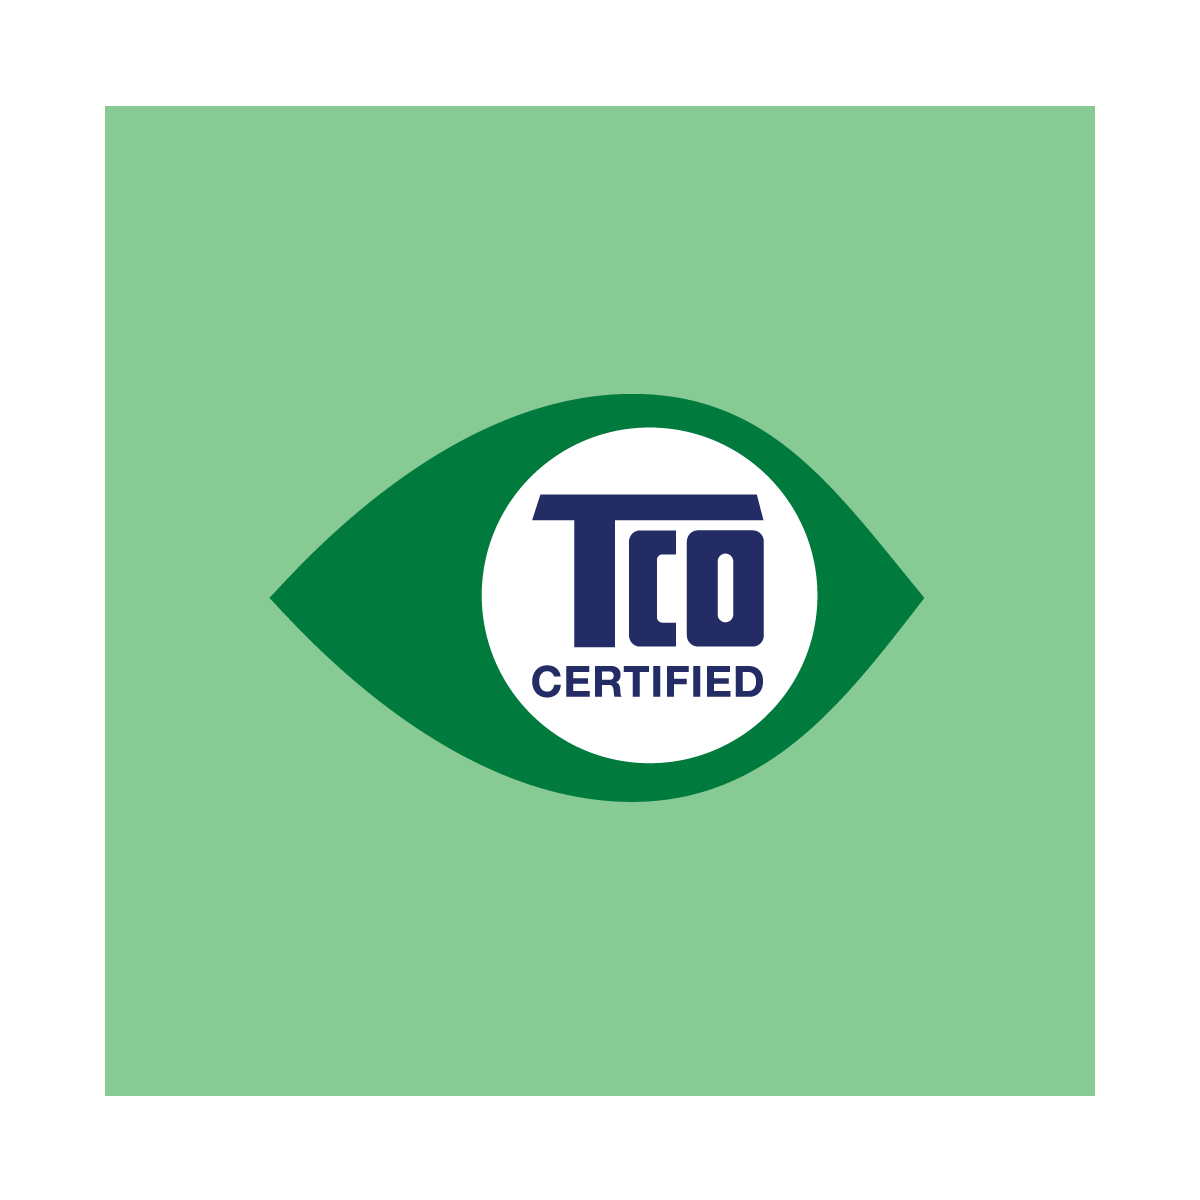 Why TCO Certified?